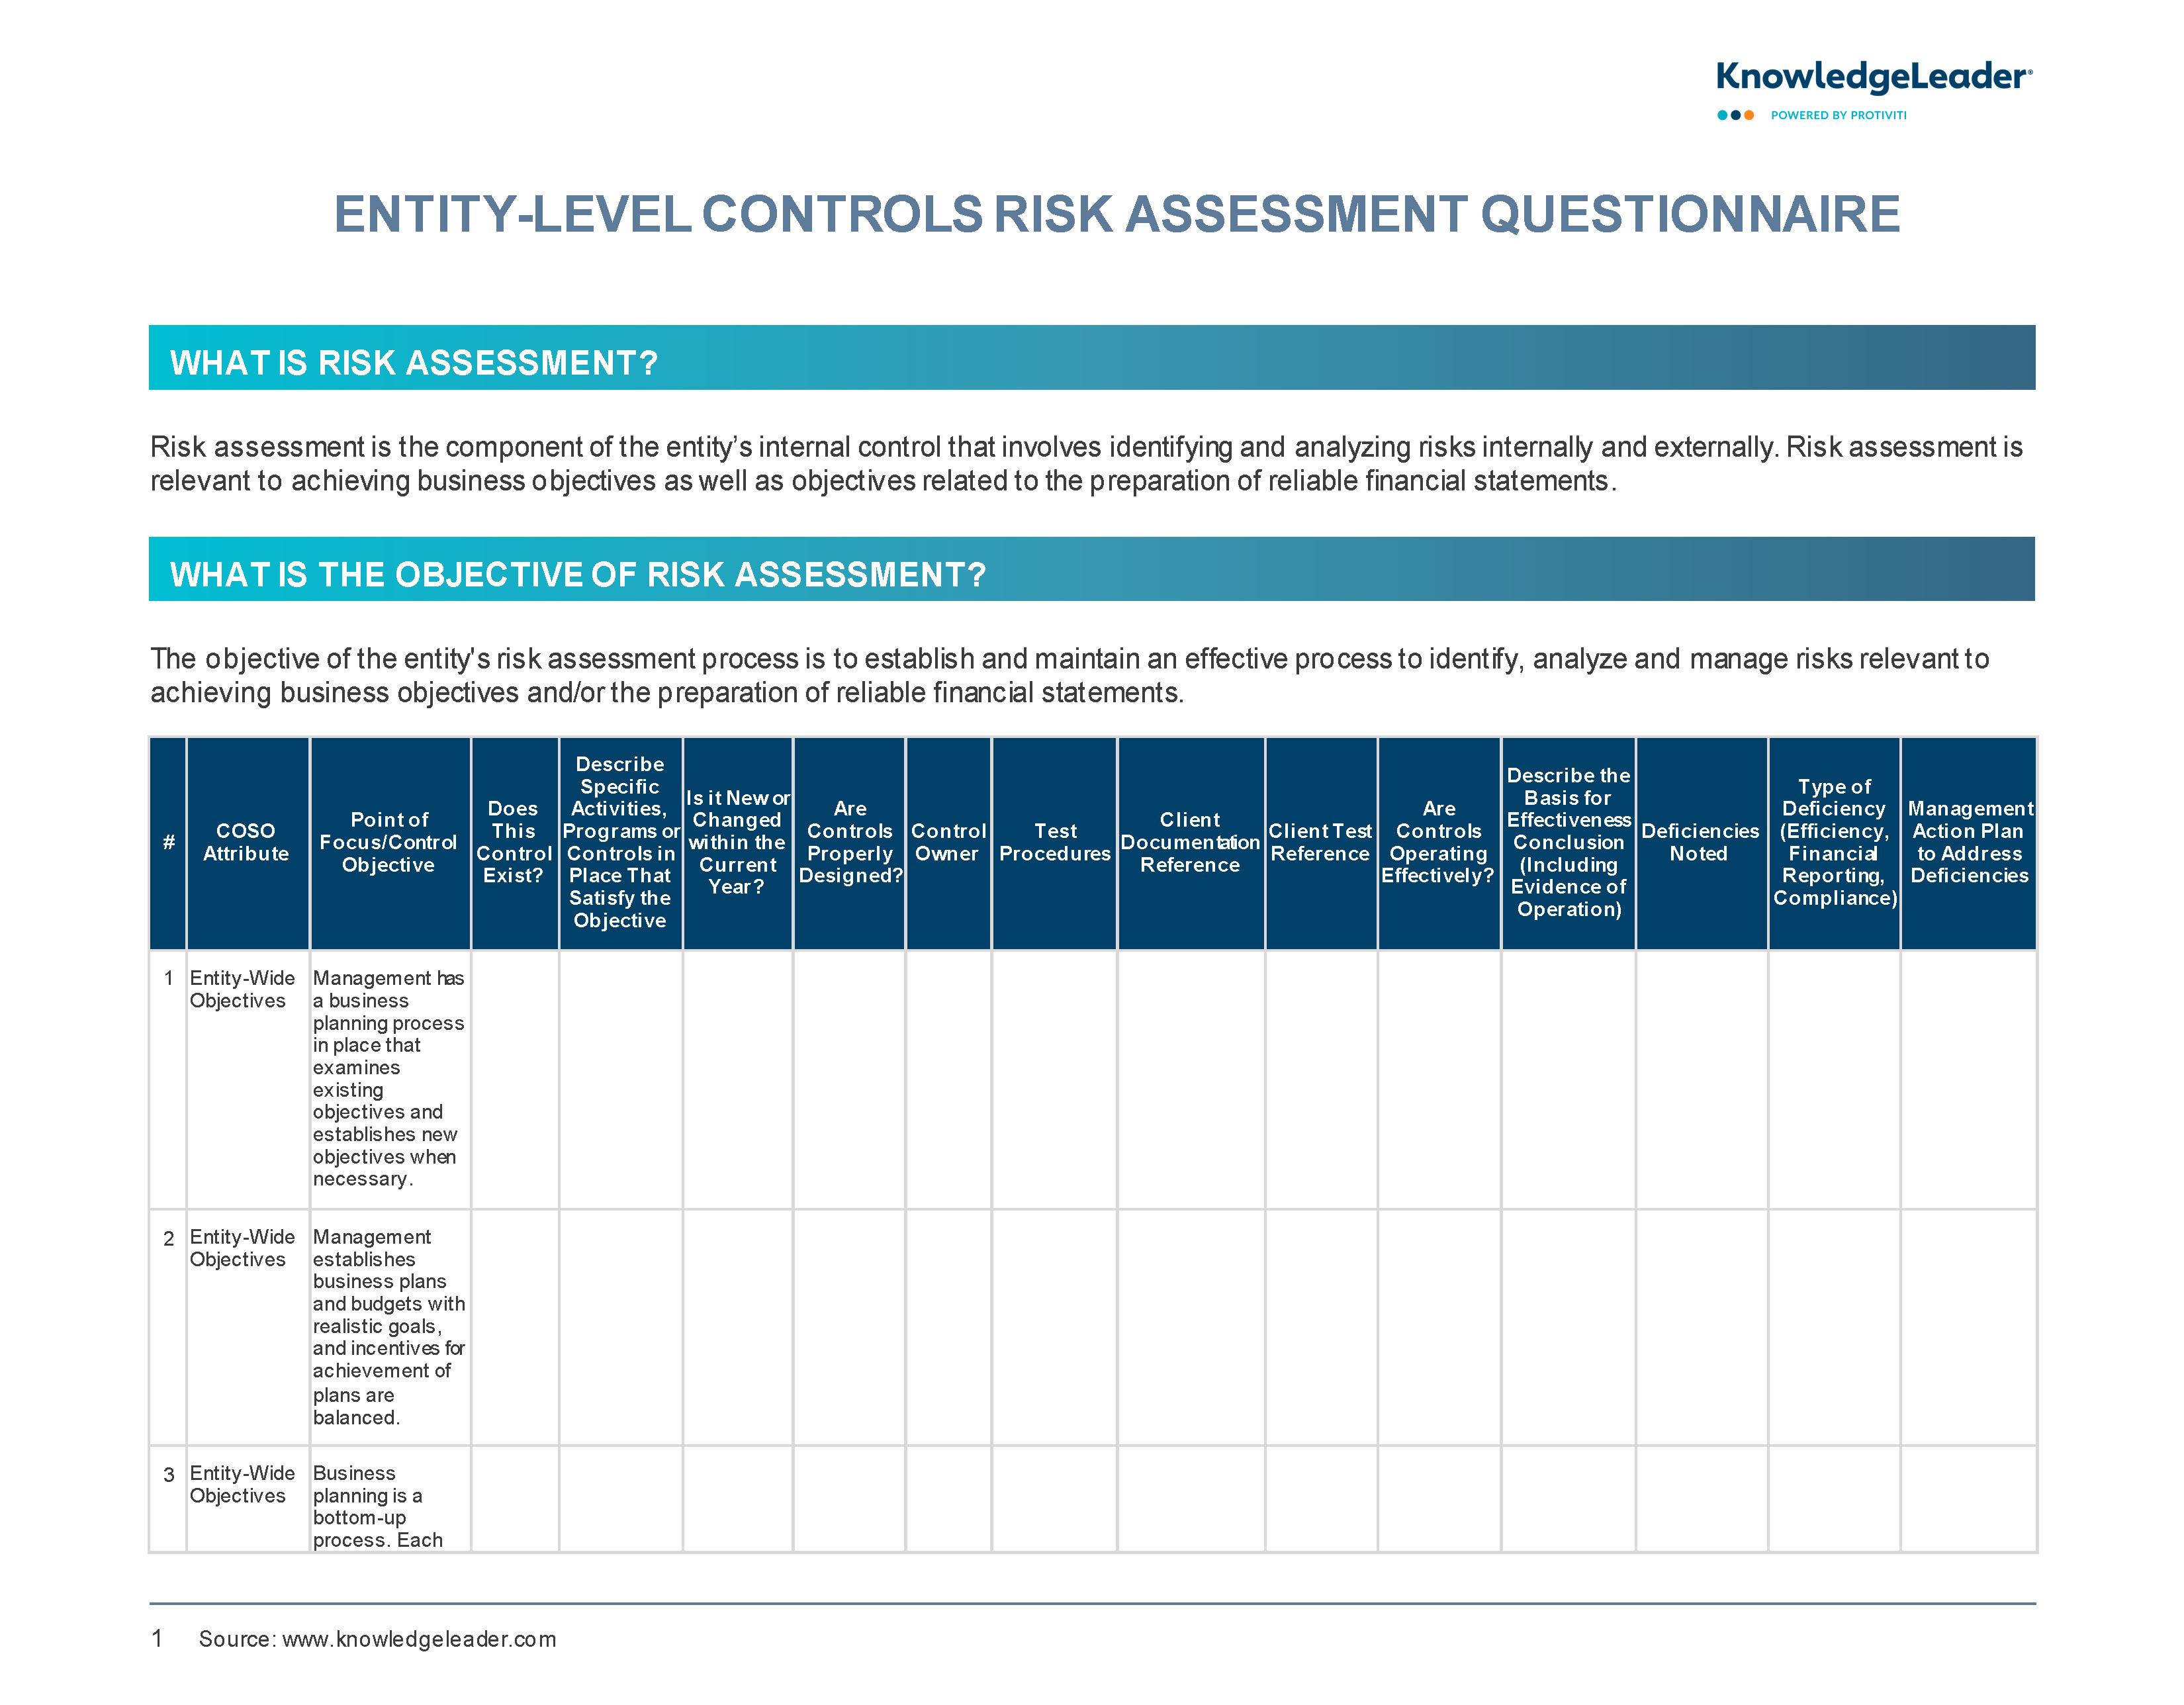 Screenshot of the first page of Entity-Level Controls Risk Assessment Questionnaire